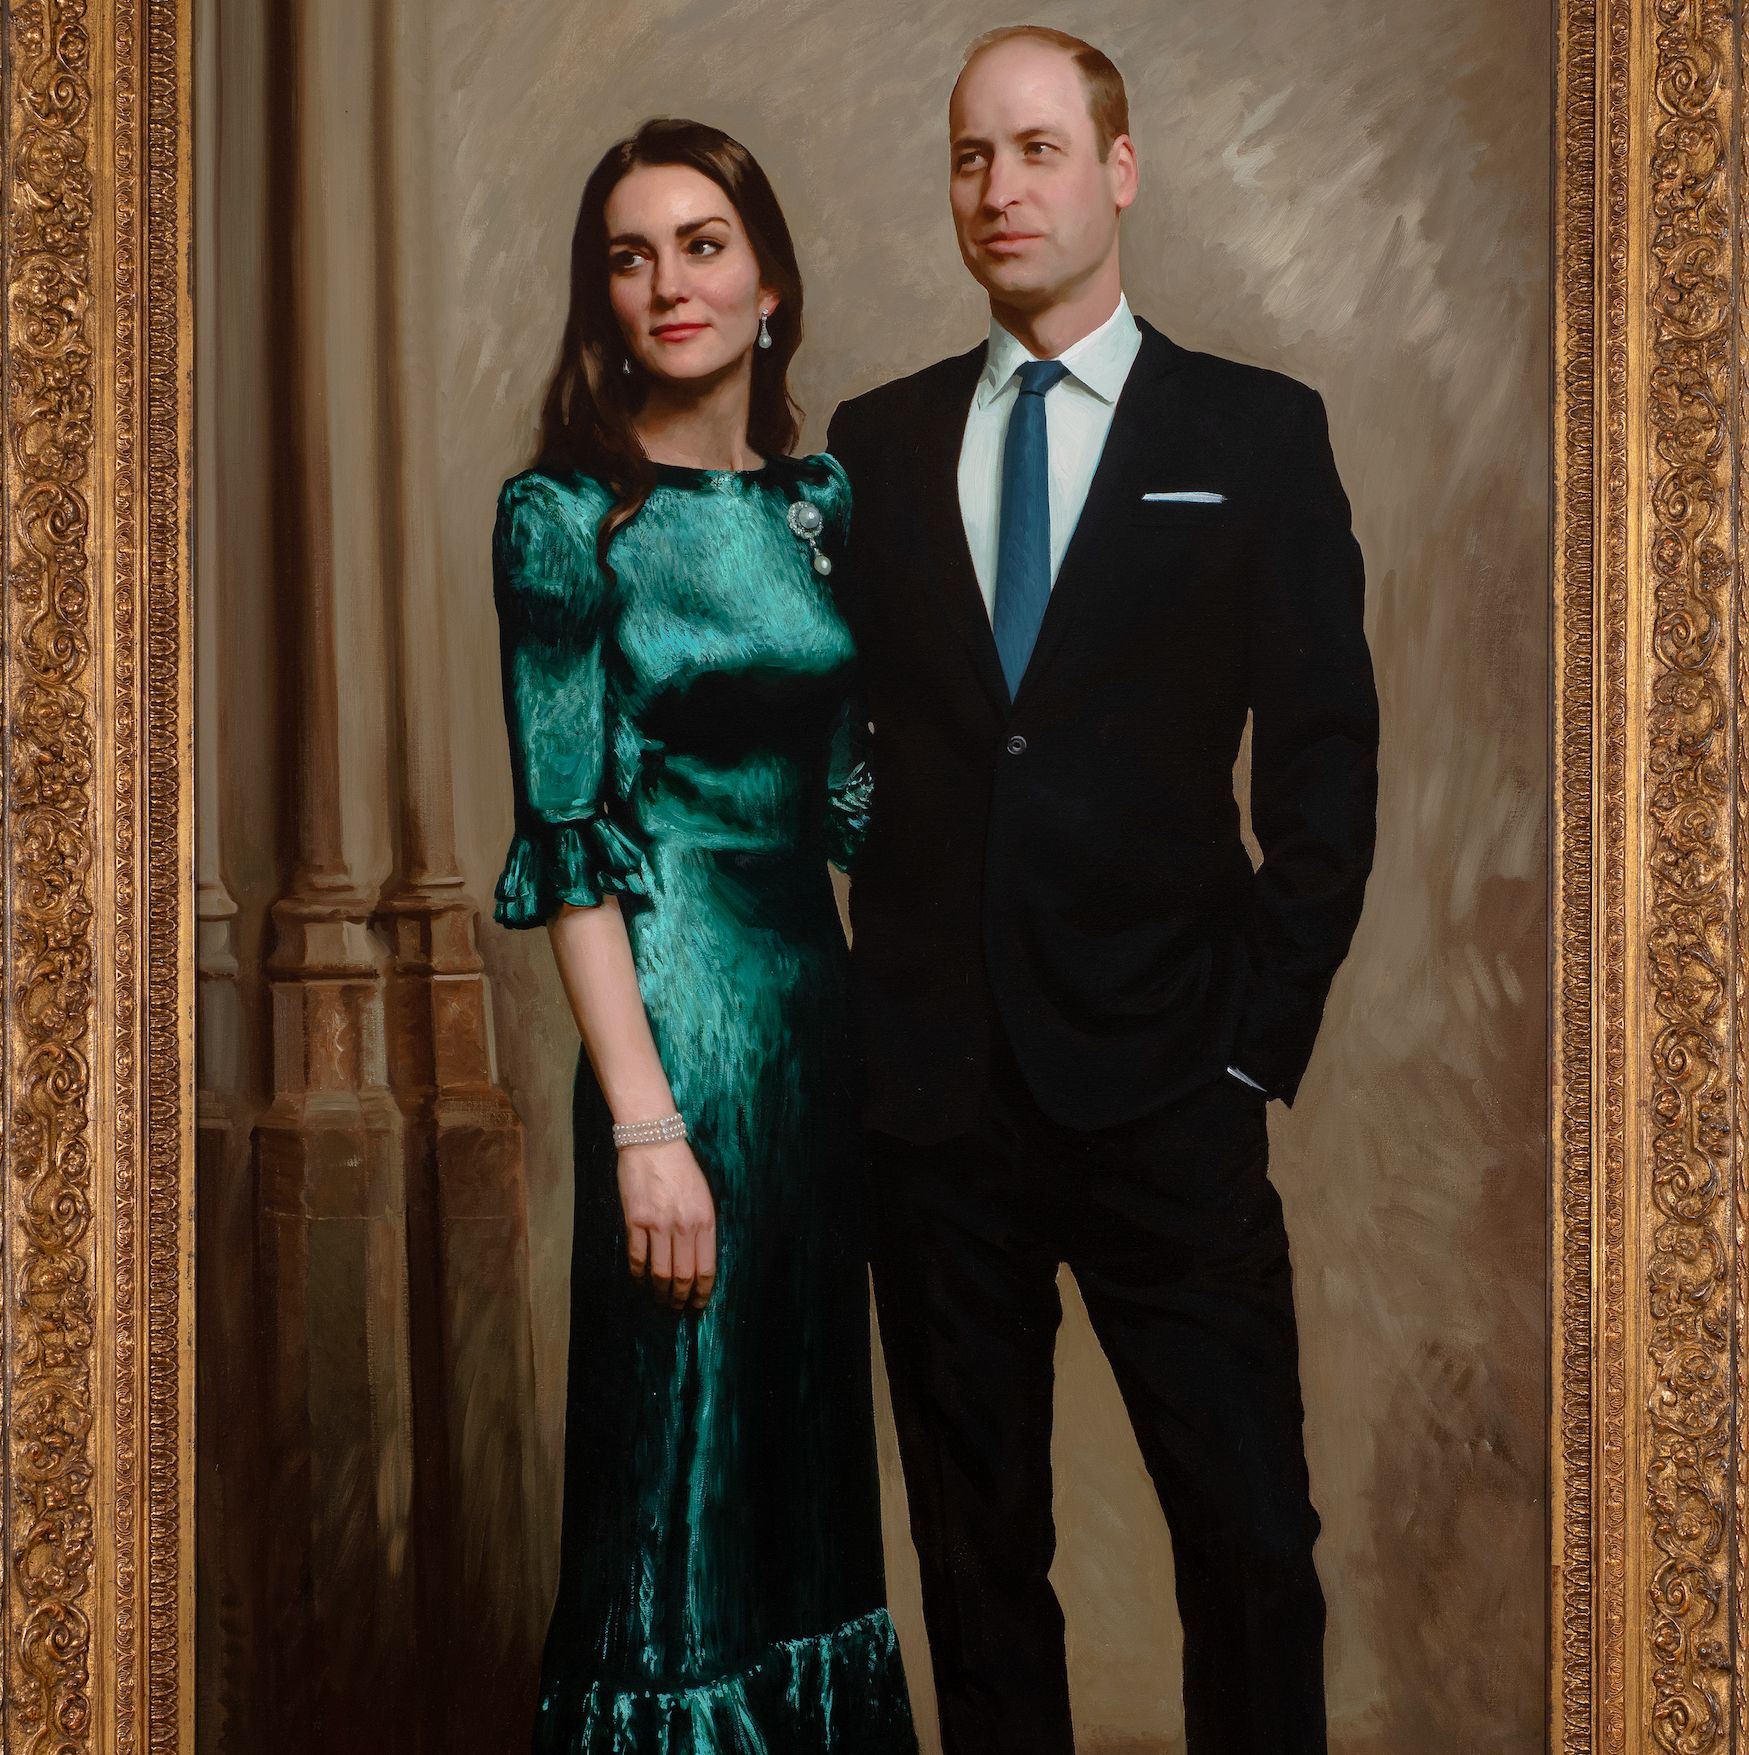 Duchess Kate Wears One of Her Most Memorable Dresses in First Official Portrait with Prince William